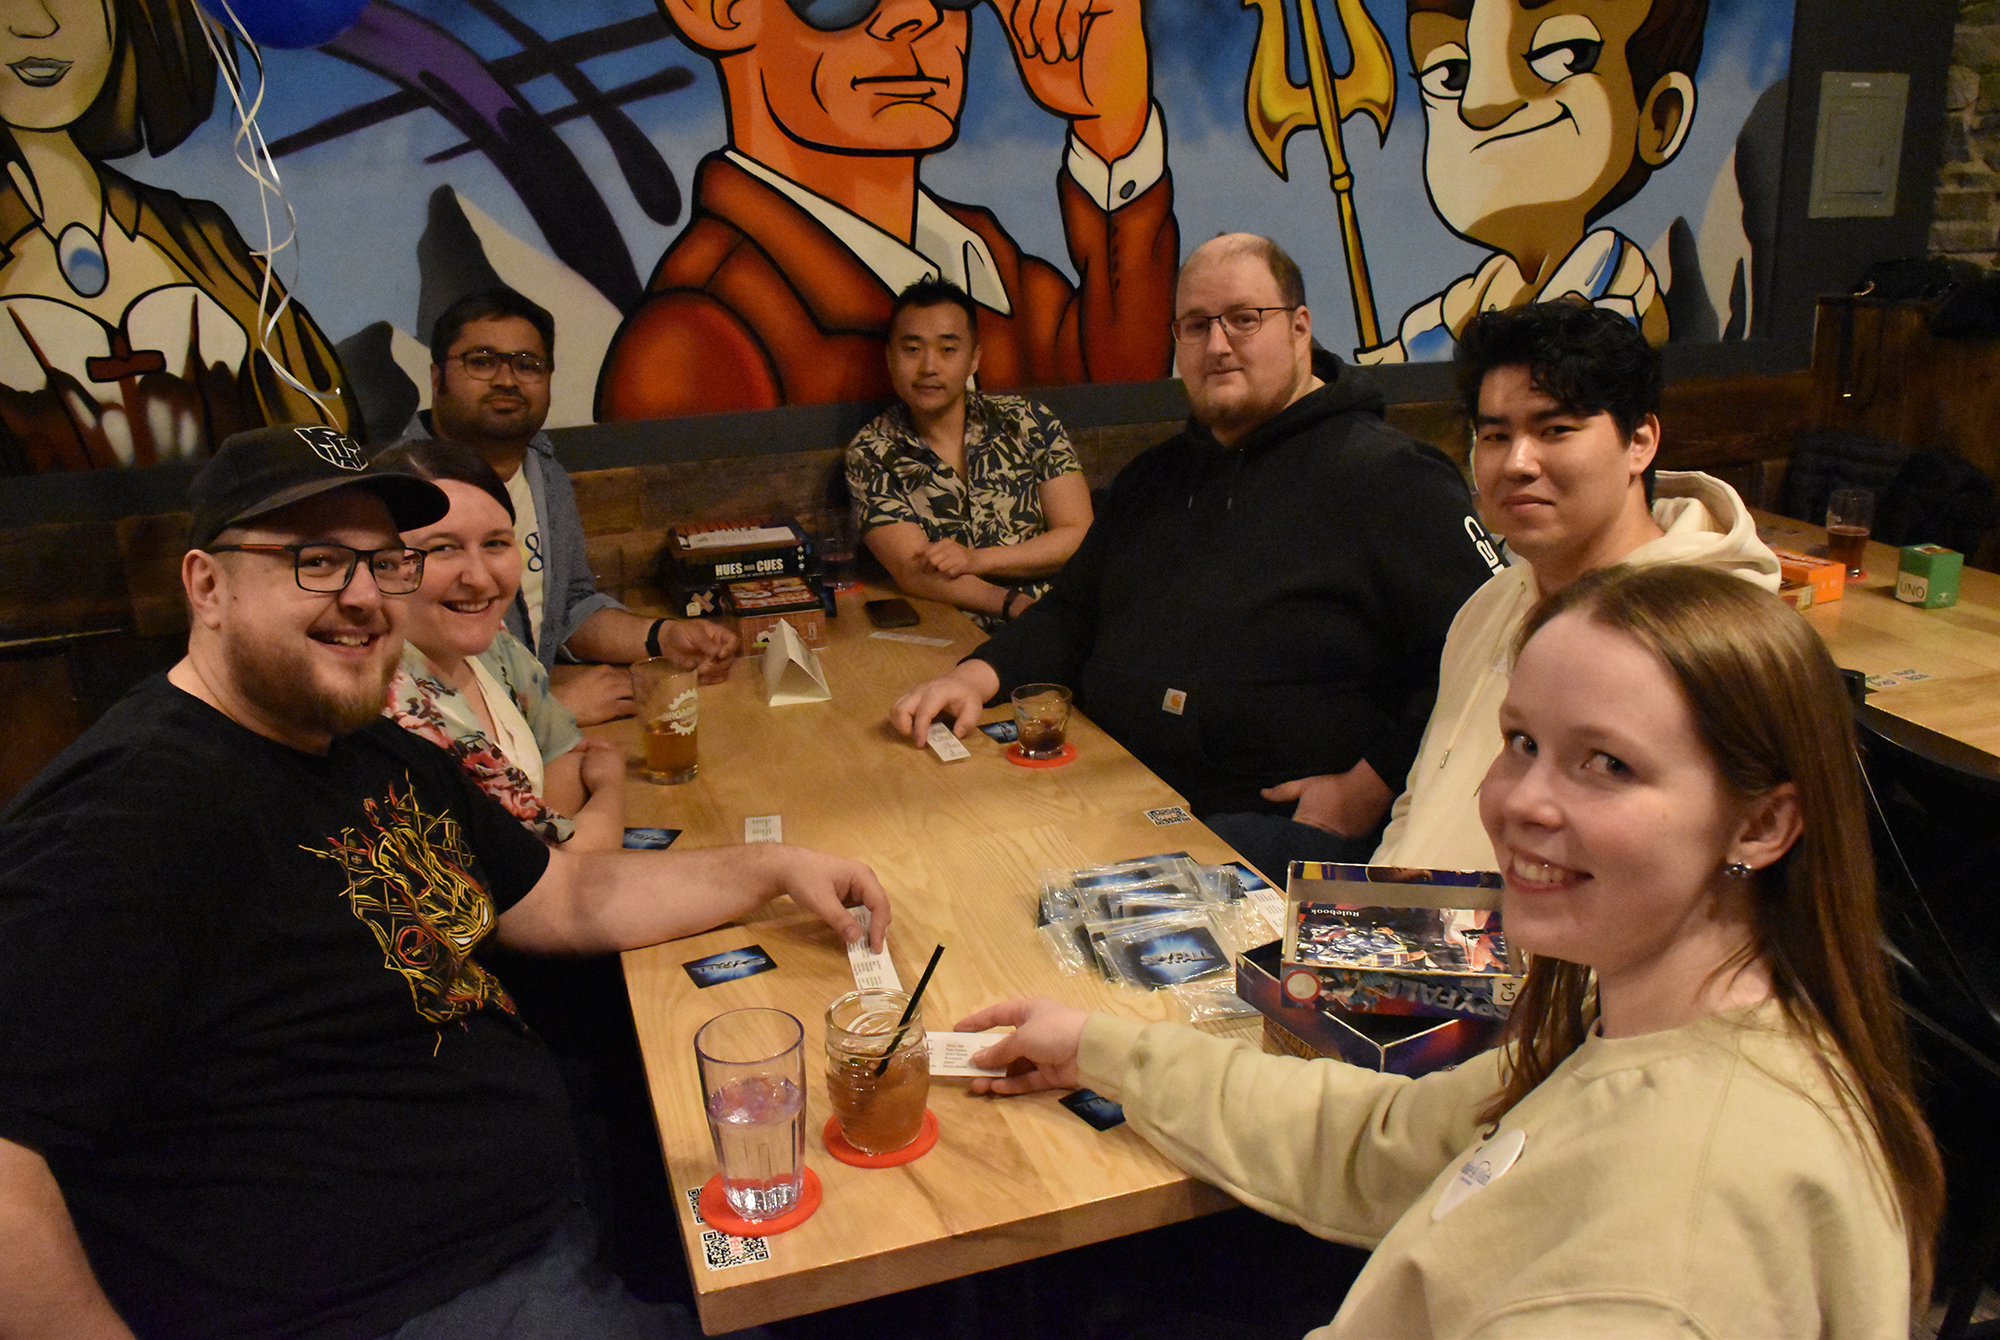 The Make-A-Wish board game night kicked off in full force with a packed house at Level One Game Pub on April 5. The student-organized event raised money for Make-A-Wish Canada through ticket sales and a silent auction.